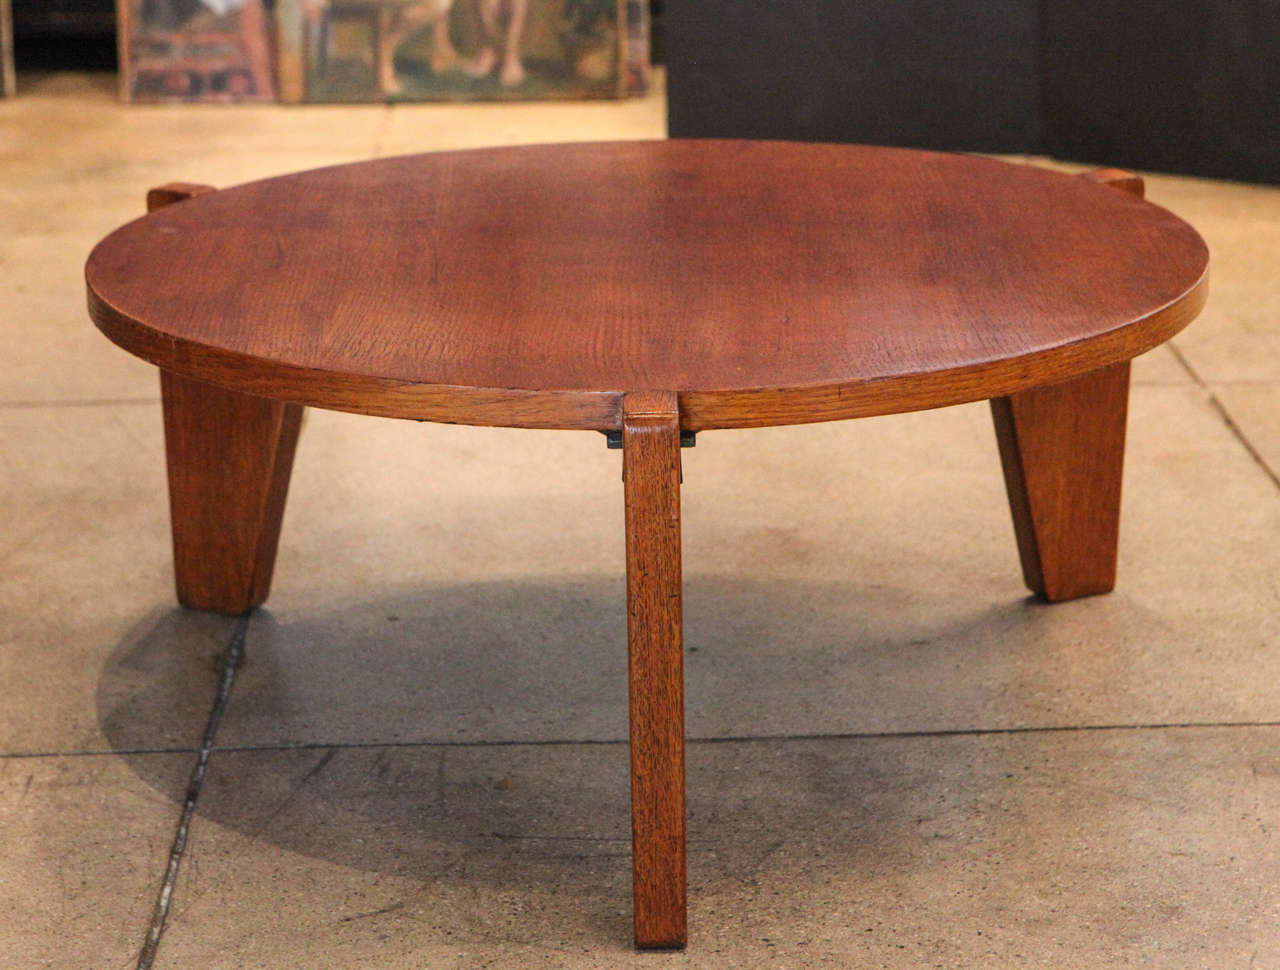 Jean Prouve's bas coffee table in oak and original steel enameled deep green frame.